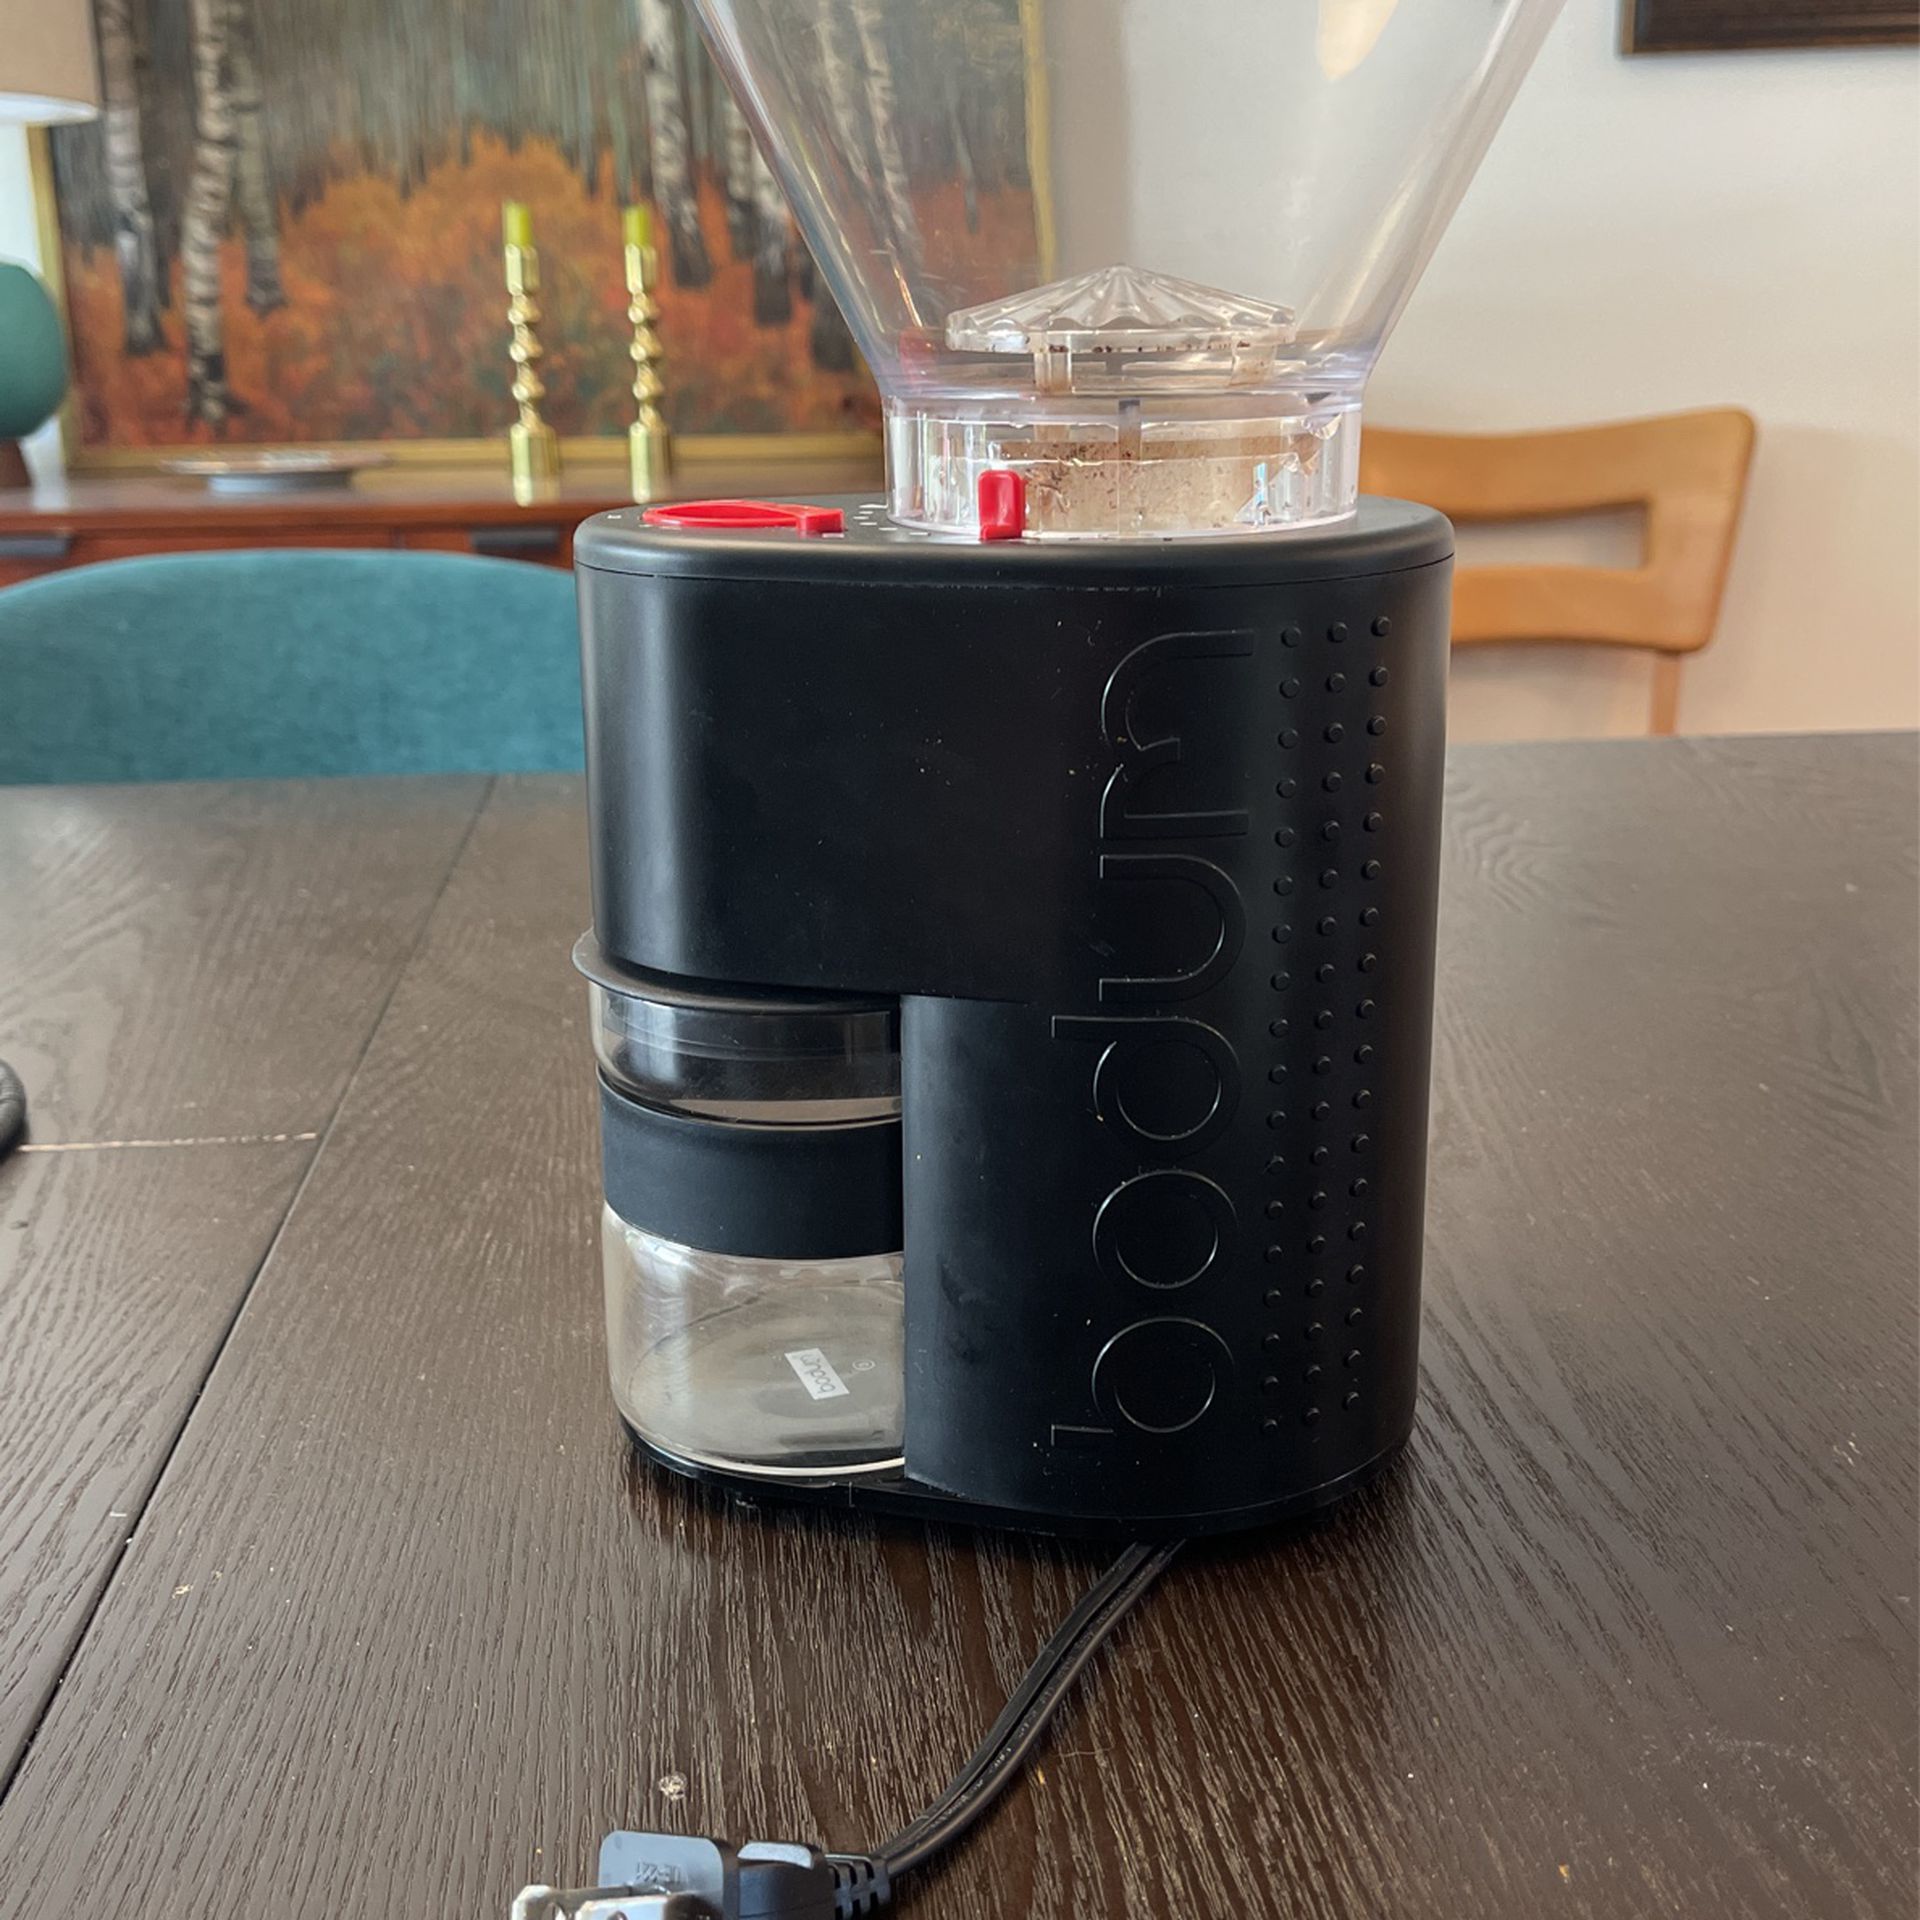 Bodum Electric Coffee Grinder for Sale in Long Beach, CA - OfferUp